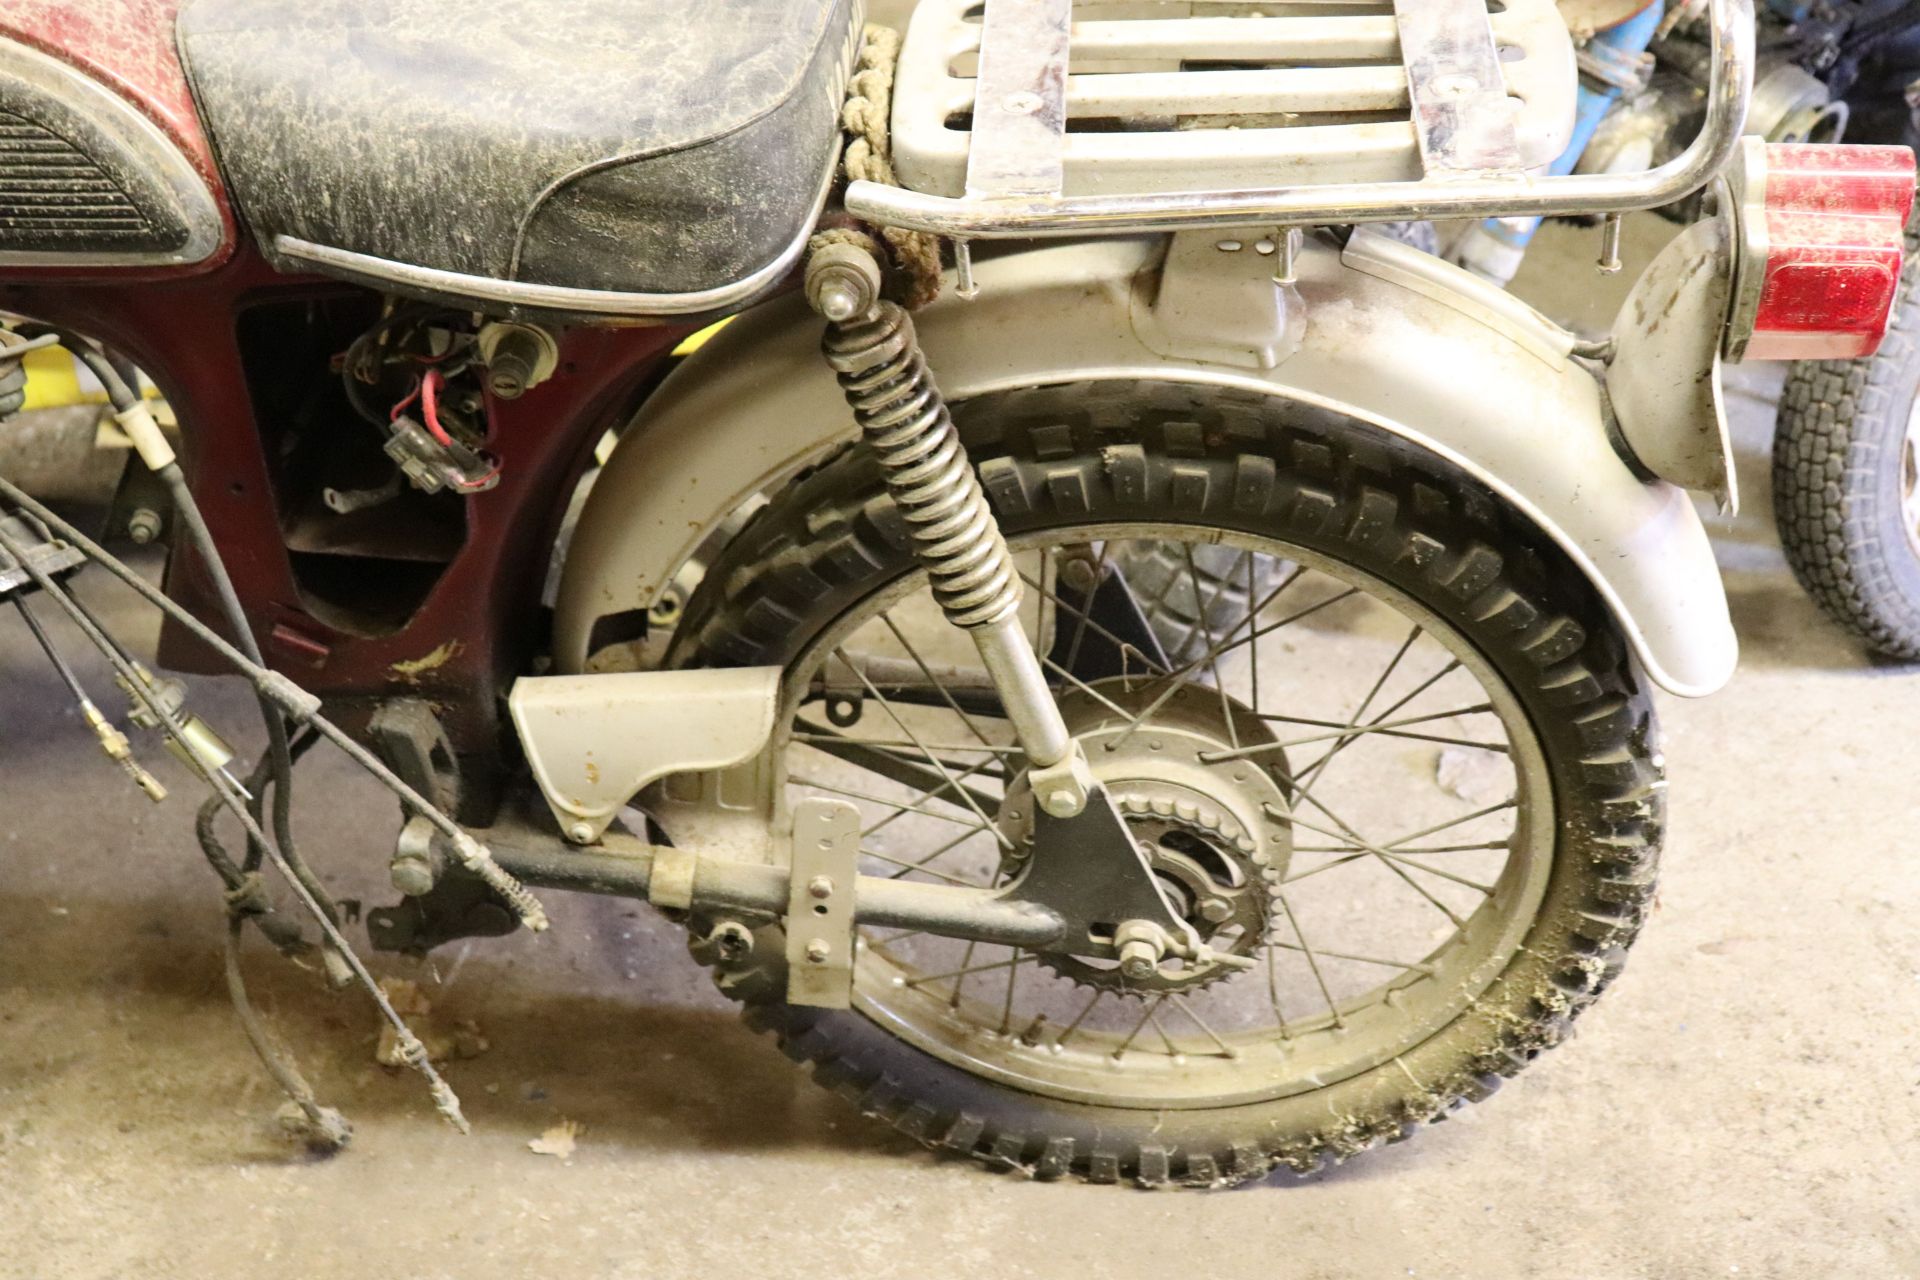 1970 Yamaha 100 L5TA, original paint, rolling chassis, 5,070 miles MINI BIKES MARKED AS PARTS BIKES, - Image 5 of 7